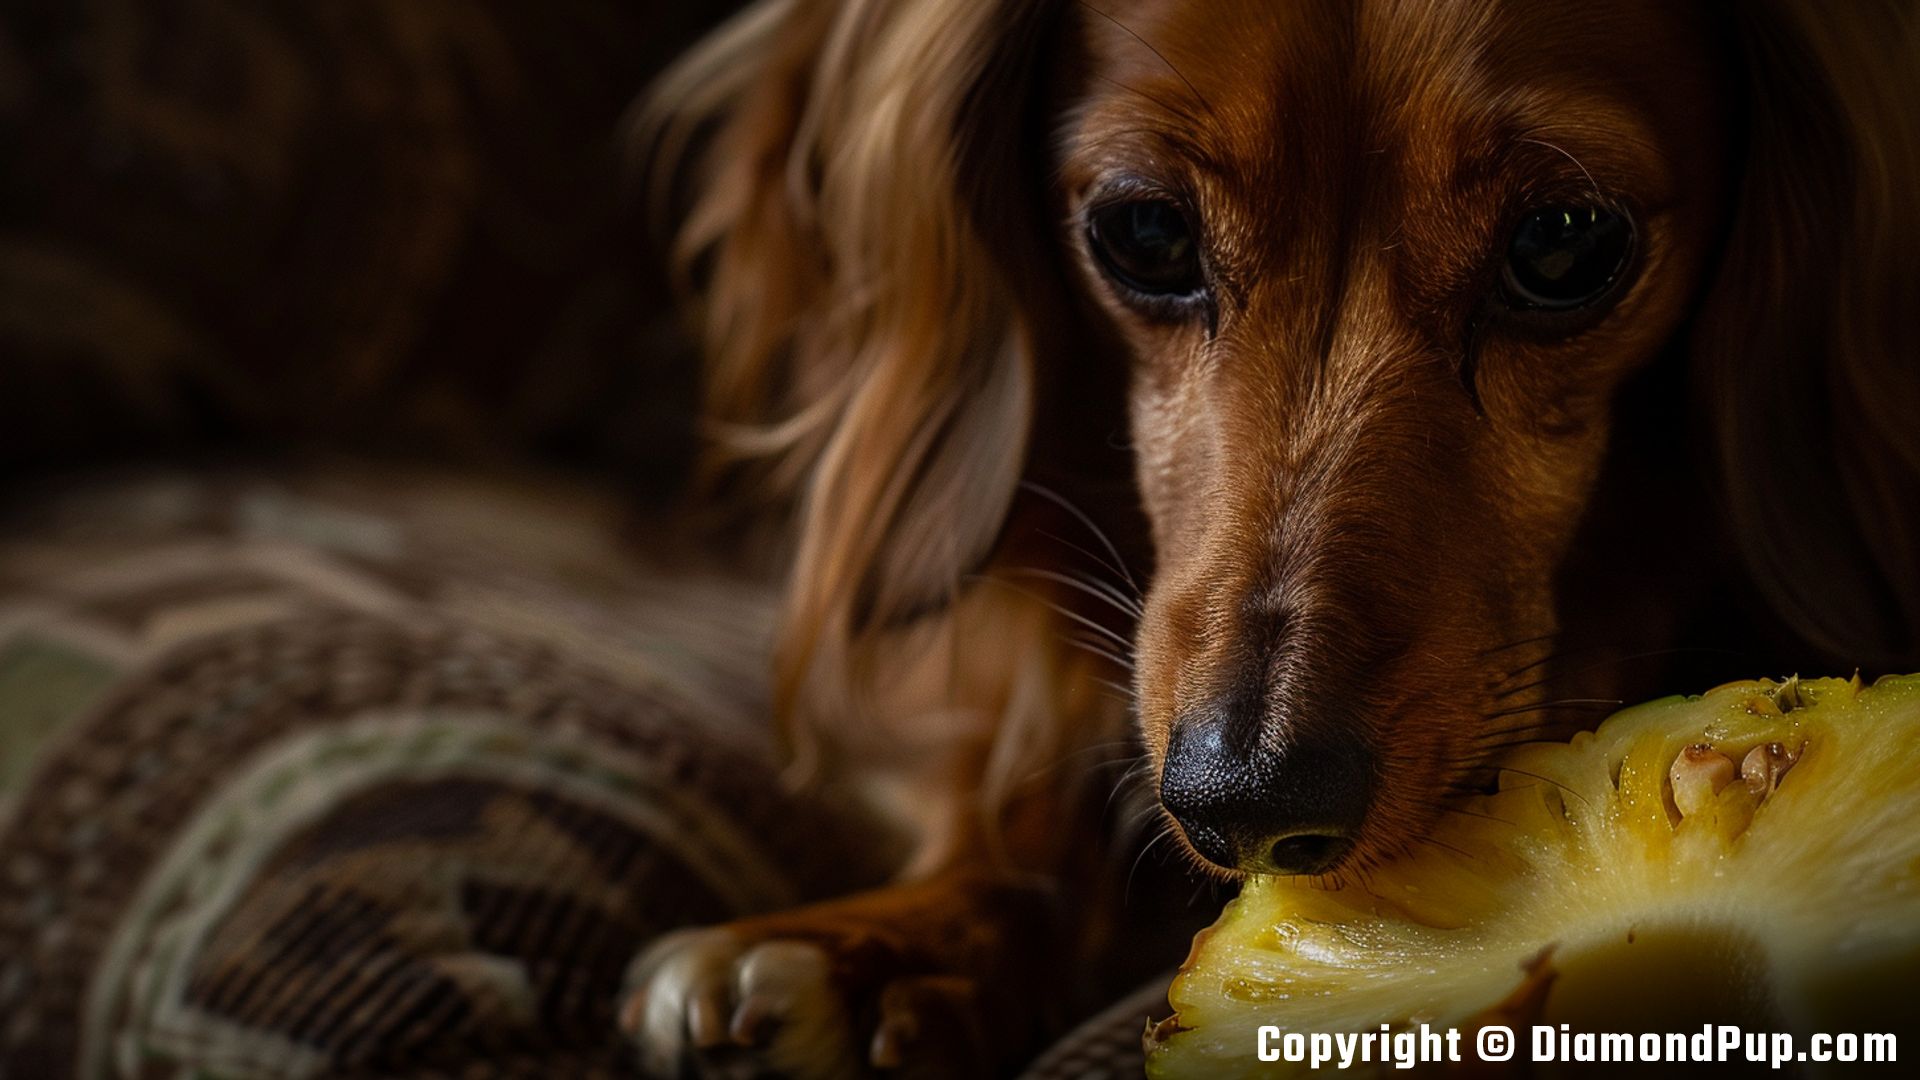 Photograph of a Cute Dachshund Snacking on Pineapple